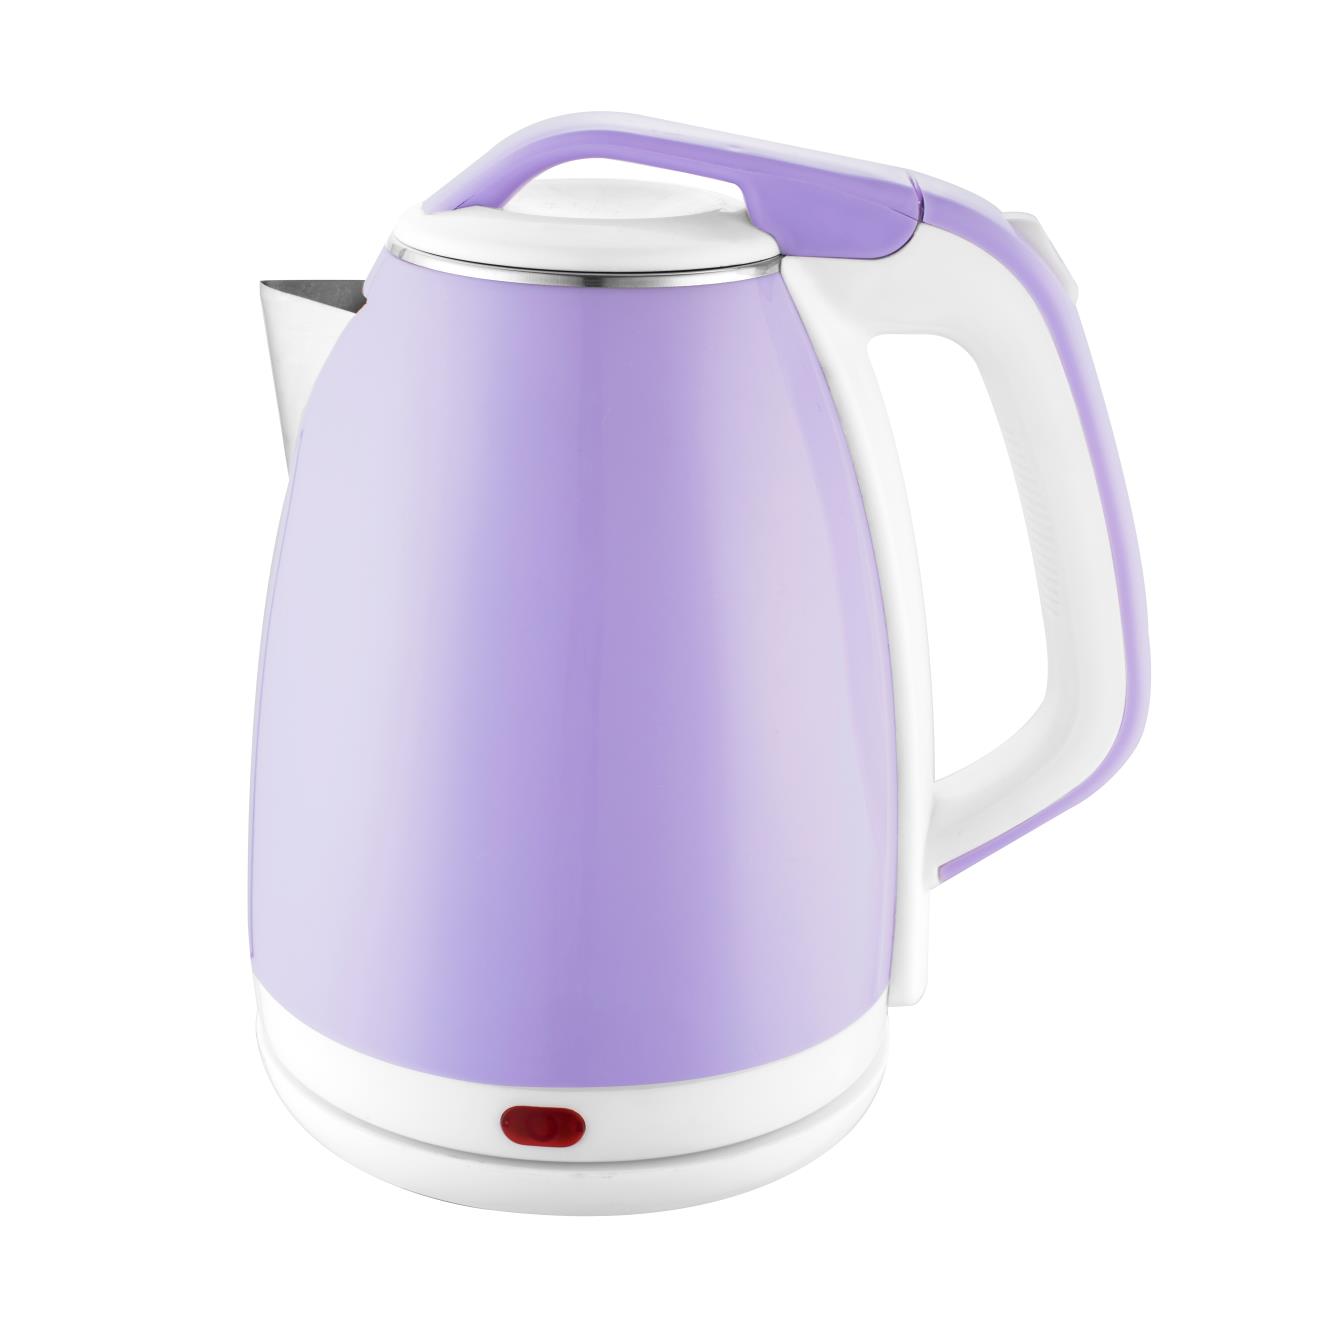 2021 hot sale home electronics kitchen appliances Double wall 2 Layers water boiling PURPLE 304 Stainless Steel Electric Kettle 